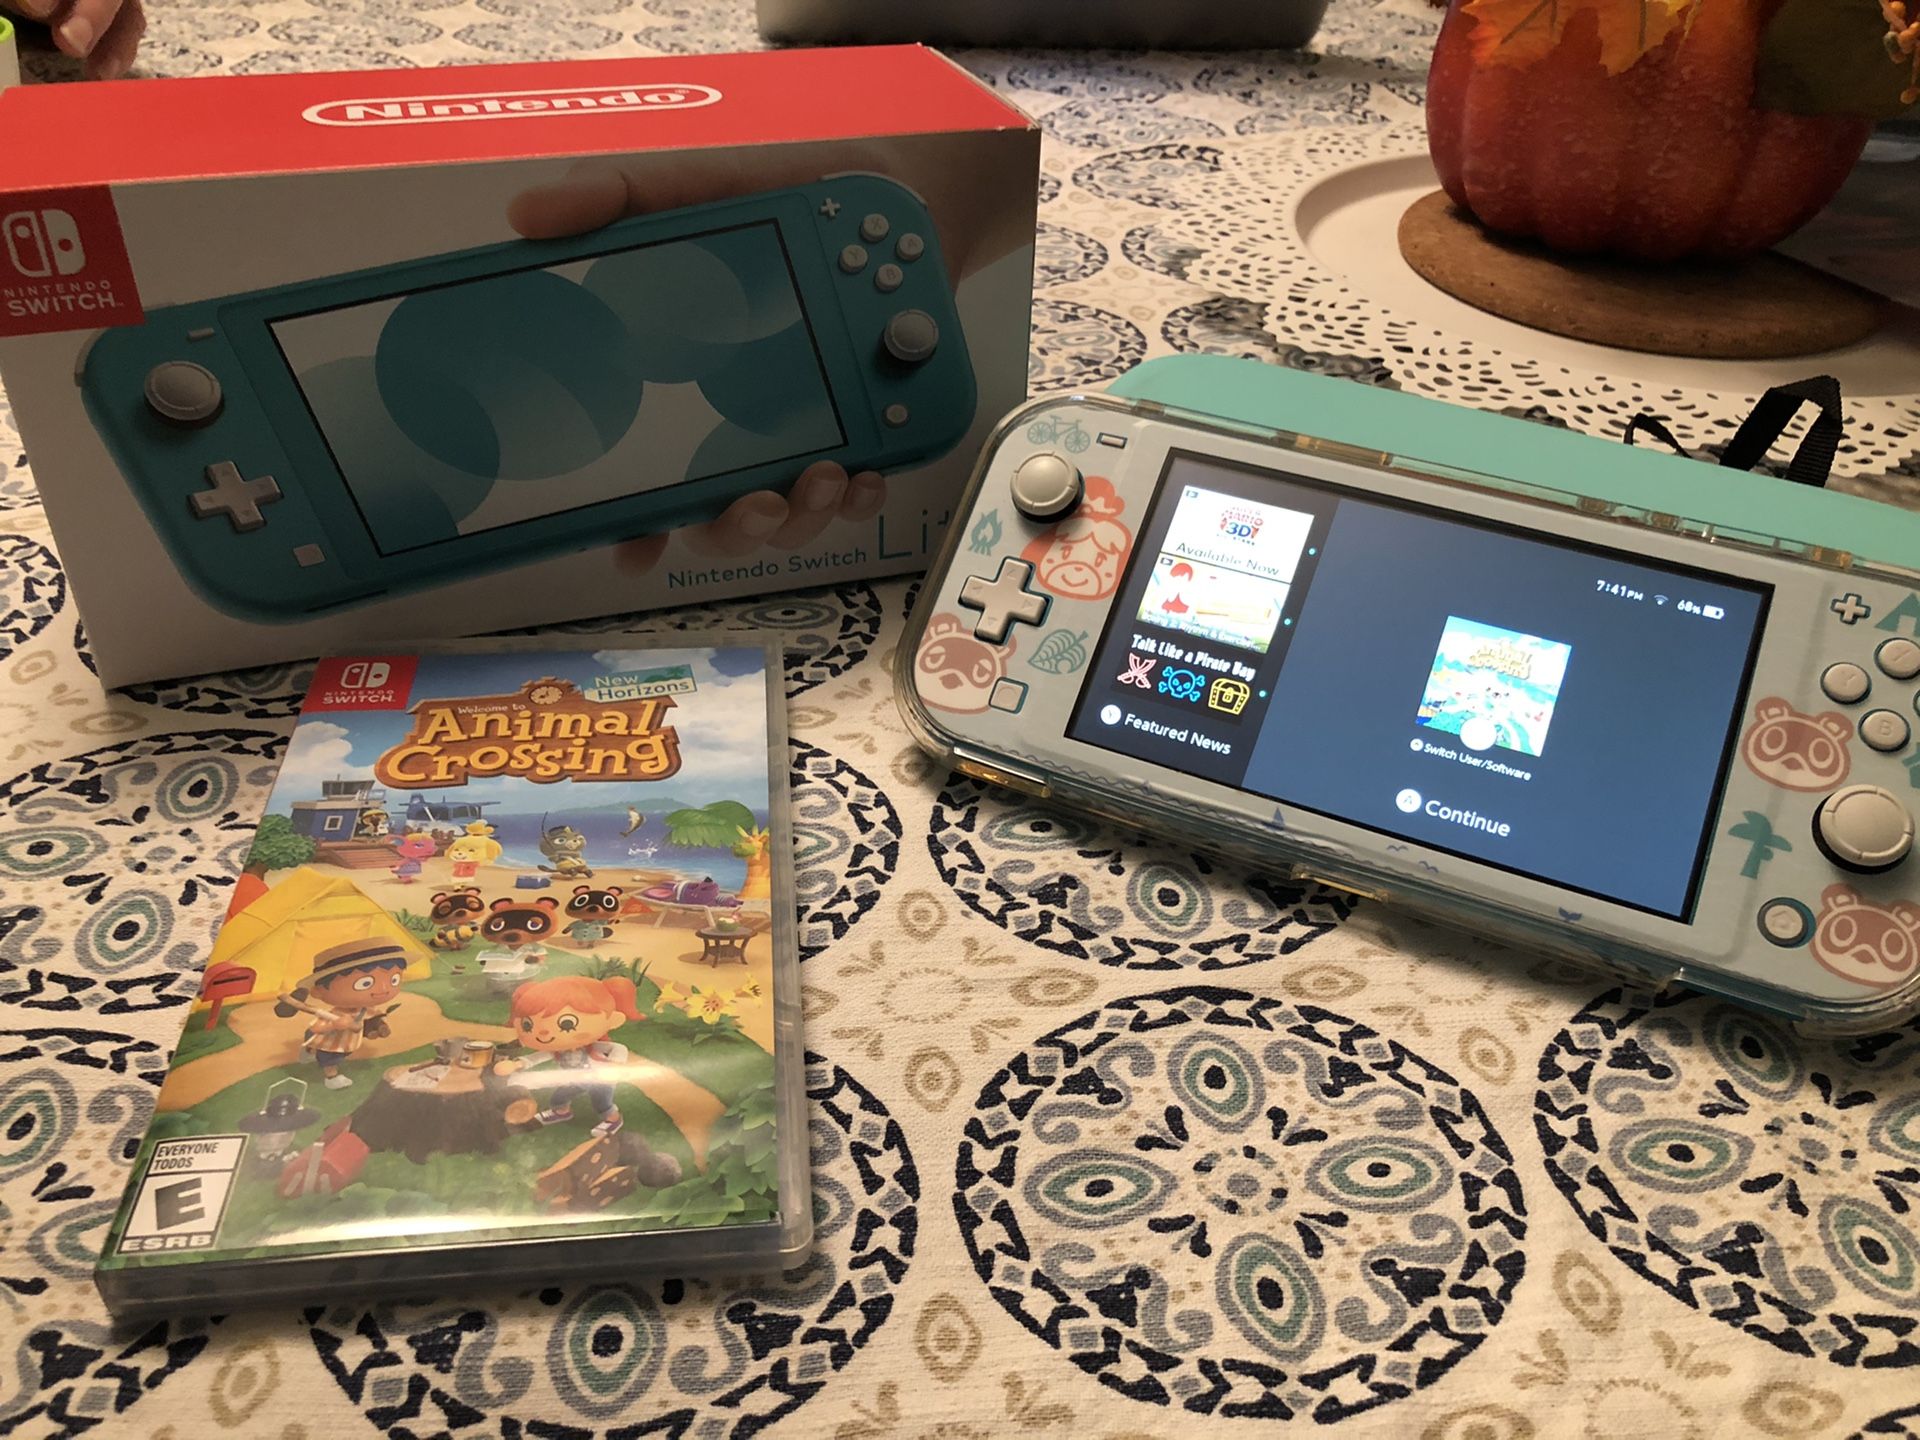 Nintendo Switch Lite in teal + Animal Crossing New Horizons